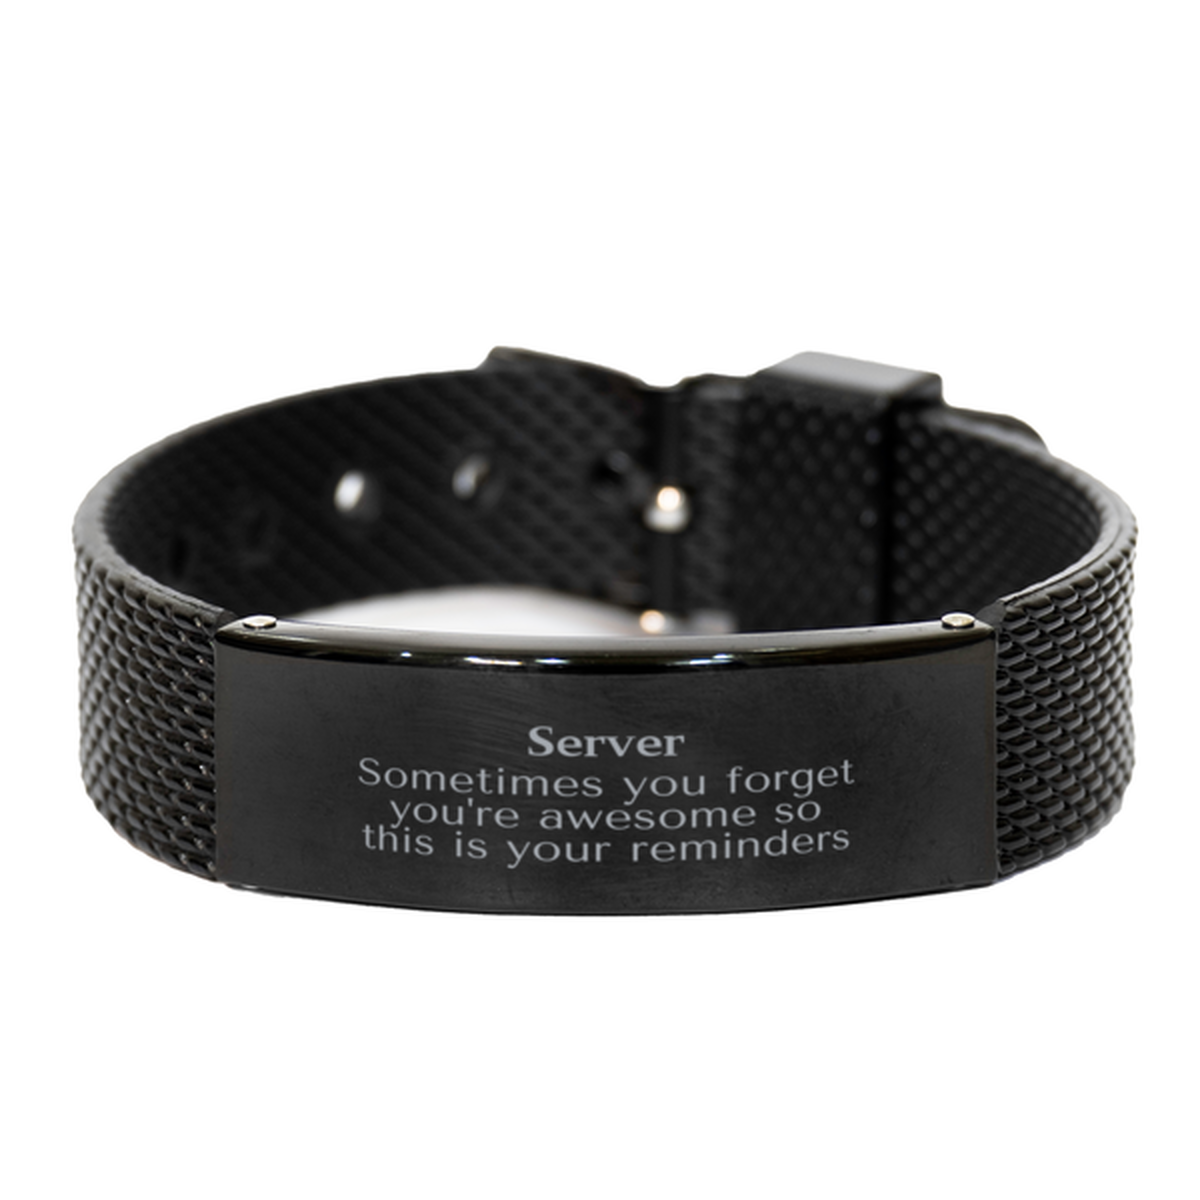 Sentimental Server Black Shark Mesh Bracelet, Server Sometimes you forget you're awesome so this is your reminders, Graduation Christmas Birthday Gifts for Server, Men, Women, Coworkers